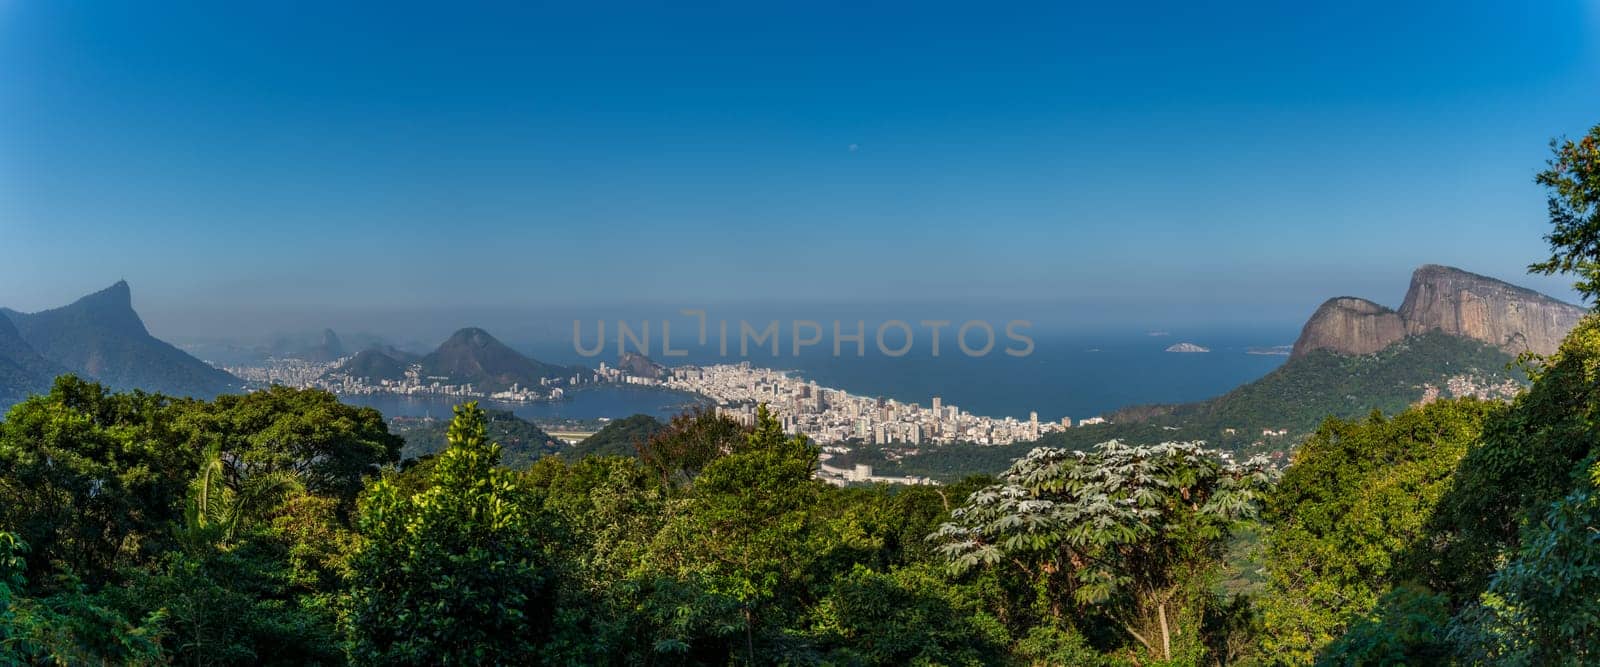 Panoramic View of Rio de Janeiro from a Forested Outlook by FerradalFCG